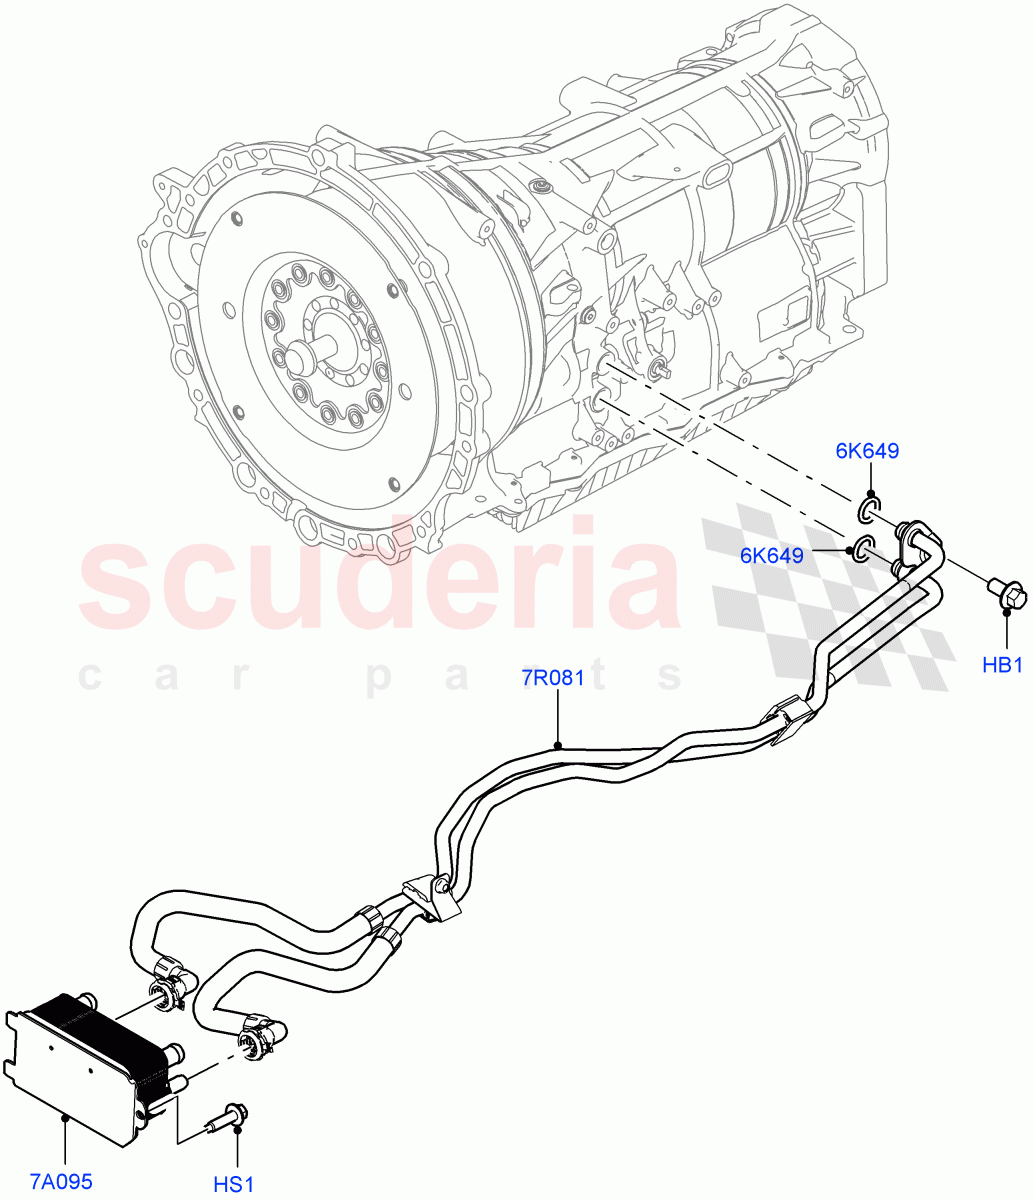 Transmission Cooling Systems(Solihull Plant Build)(2.0L I4 High DOHC AJ200 Petrol,8 Speed Auto Trans ZF 8HP45)((V)FROMJA000001) of Land Rover Land Rover Range Rover Sport (2014+) [3.0 I6 Turbo Diesel AJ20D6]